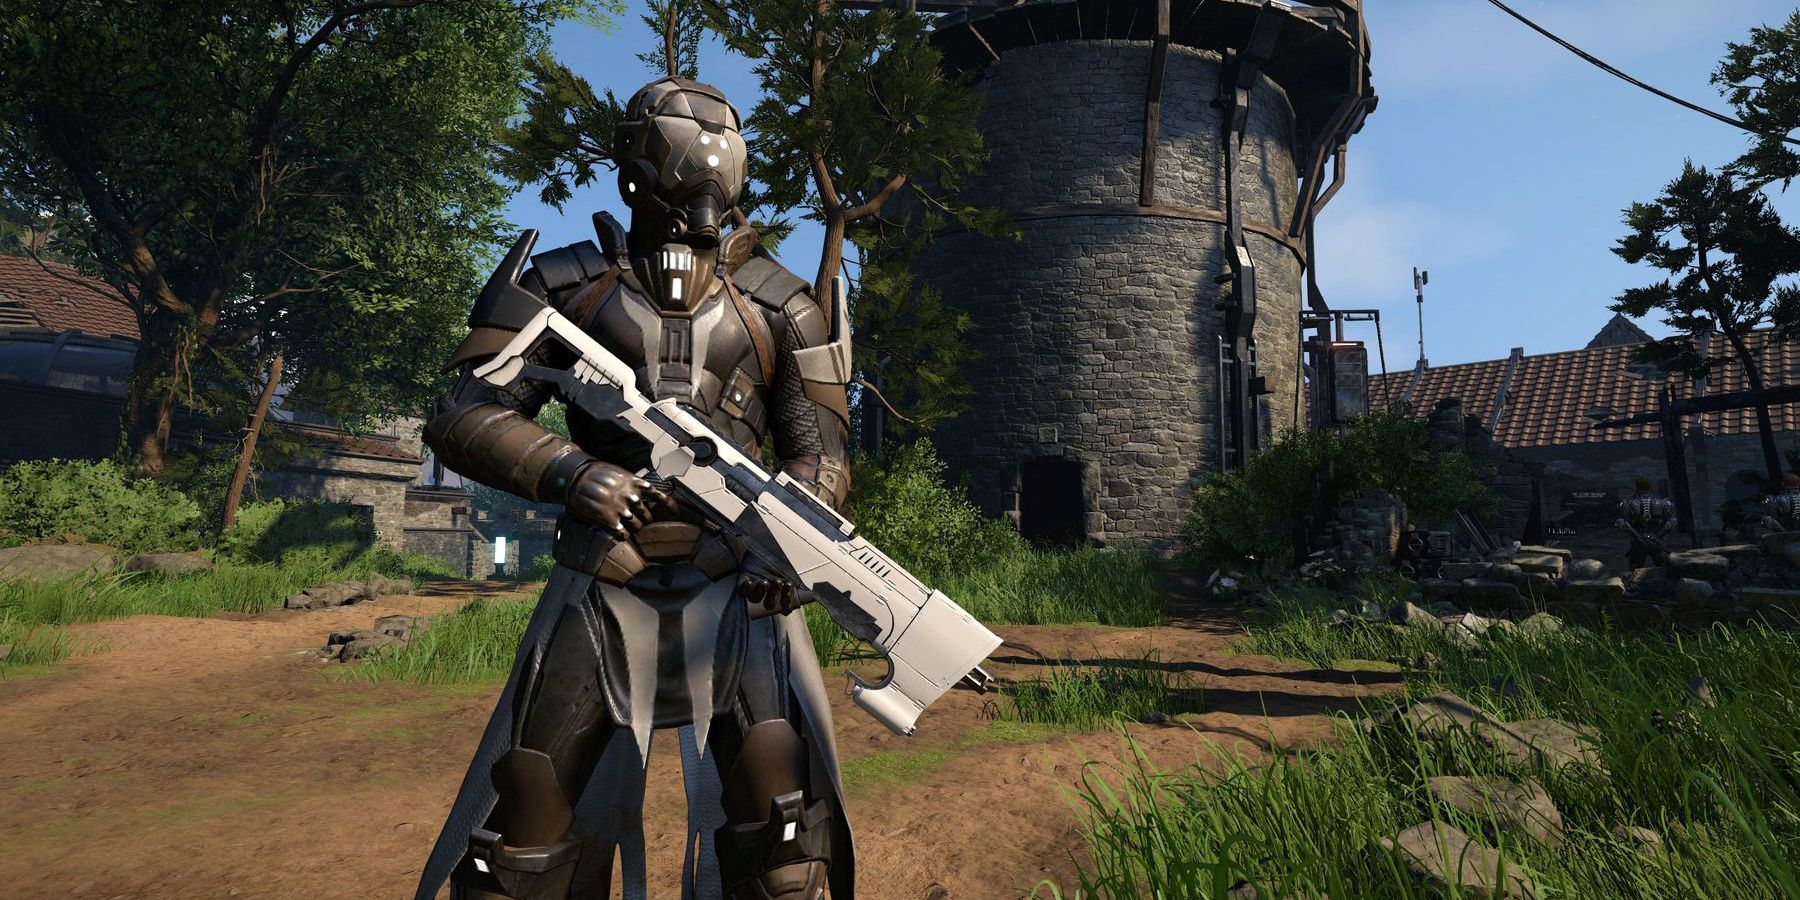 Latest Elex 2 Trailer Shows a World Full of Choices